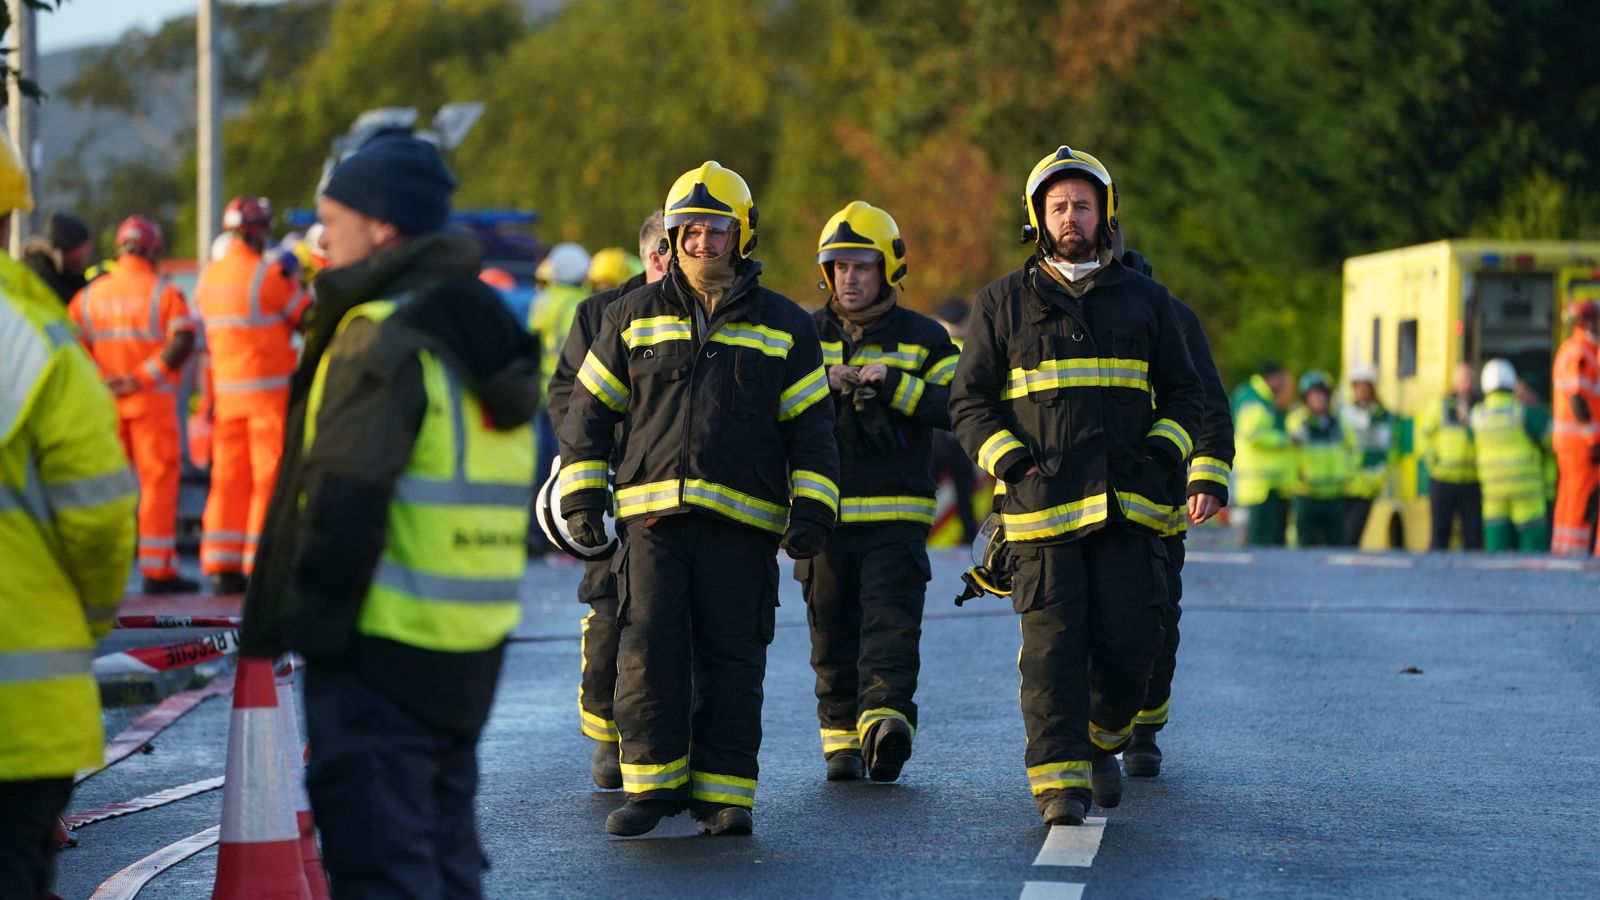 Donegal explosion: Amid deep grief there is a strong sense of community in this village